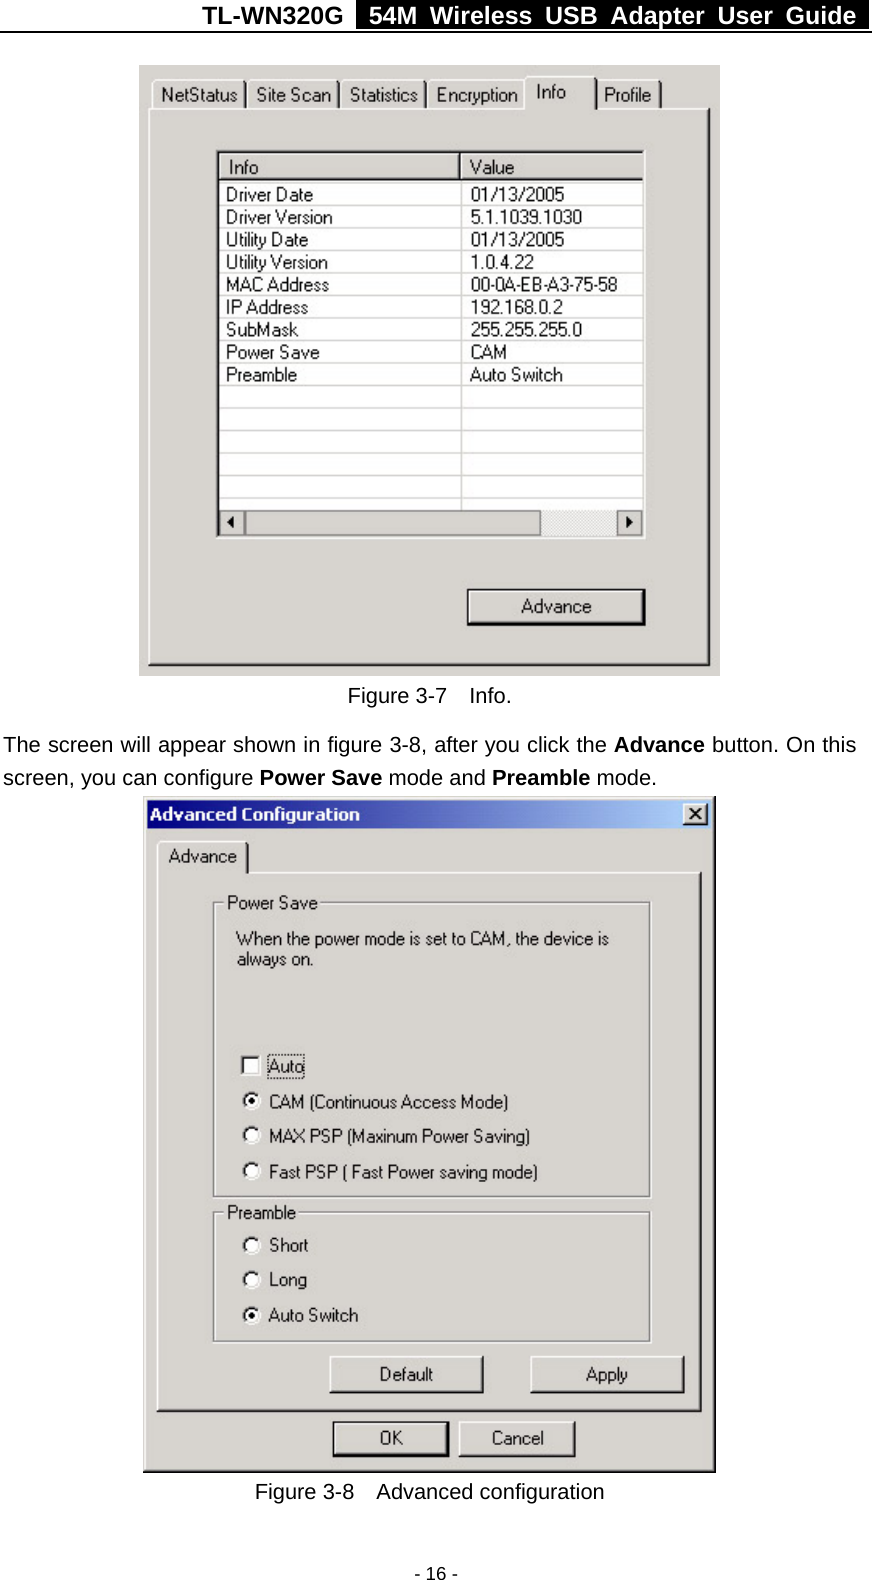 TL-WN320G   54M Wireless USB Adapter User Guide  - 16 -  Figure 3-7  Info. The screen will appear shown in figure 3-8, after you click the Advance button. On this screen, you can configure Power Save mode and Preamble mode.  Figure 3-8  Advanced configuration 